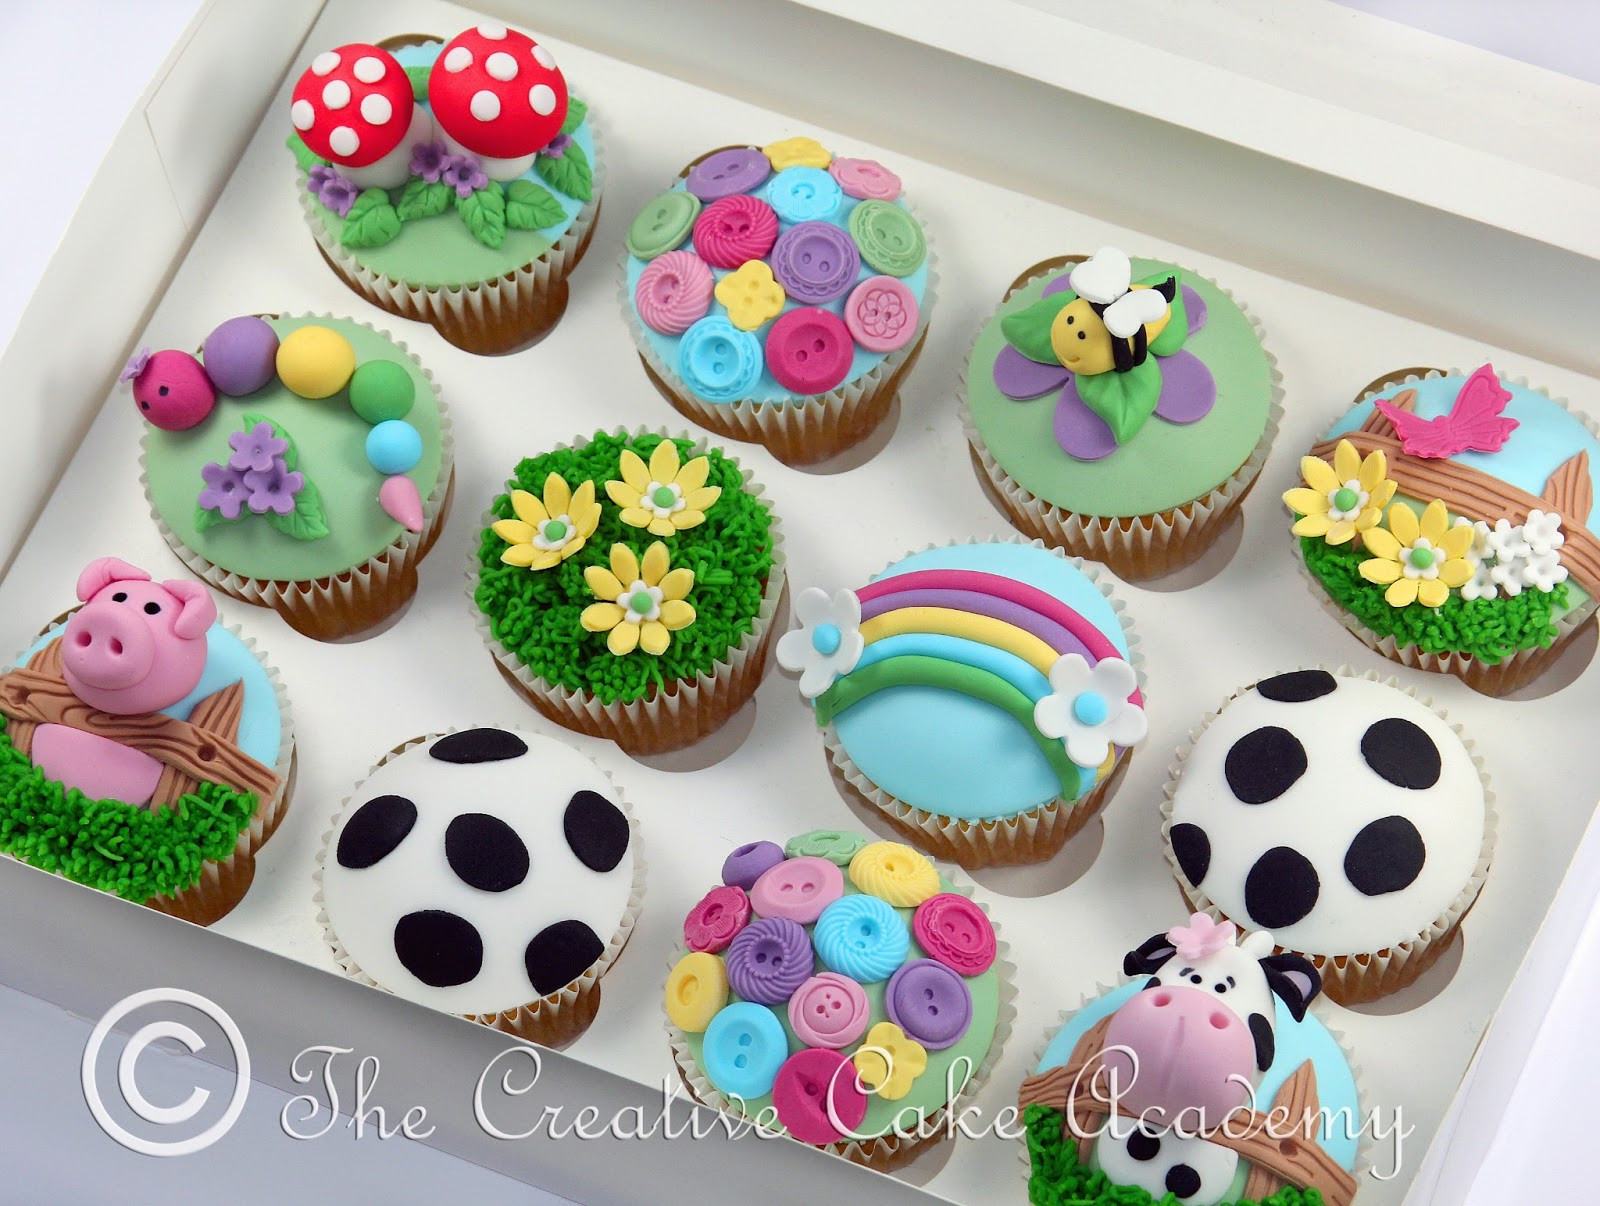 Cupcake Decorating Ideas For Kids
 The Creative Cake Academy CHILDREN S PARTY CUPCAKES